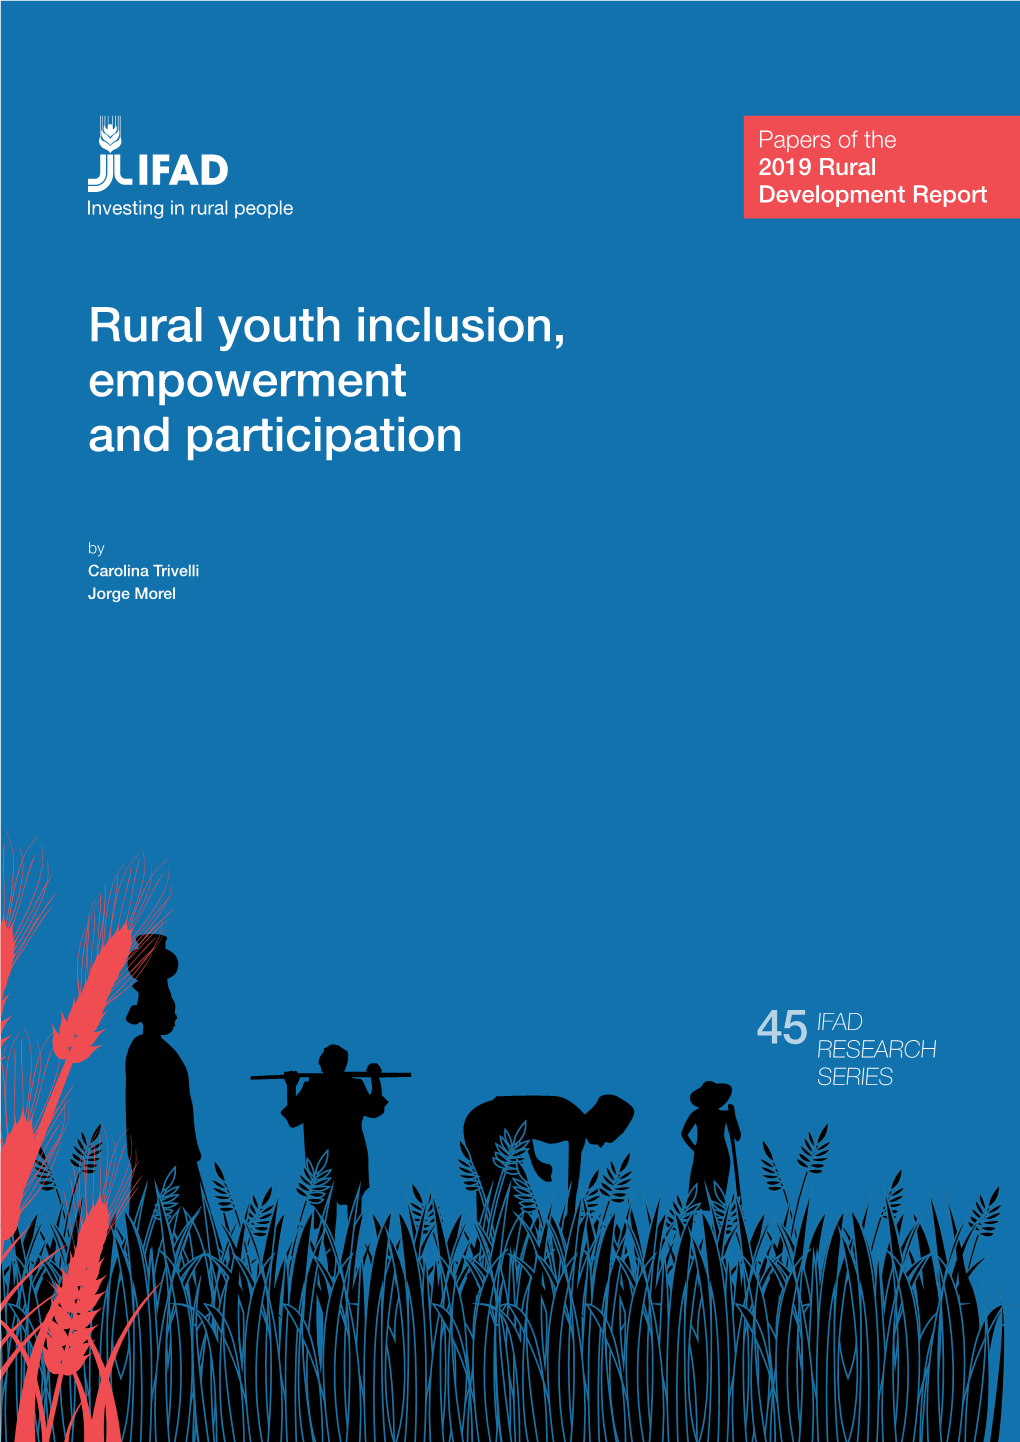 Rural Youth Inclusion, Empowerment and Participation (Carolina Trivelli and Jorge Morel)